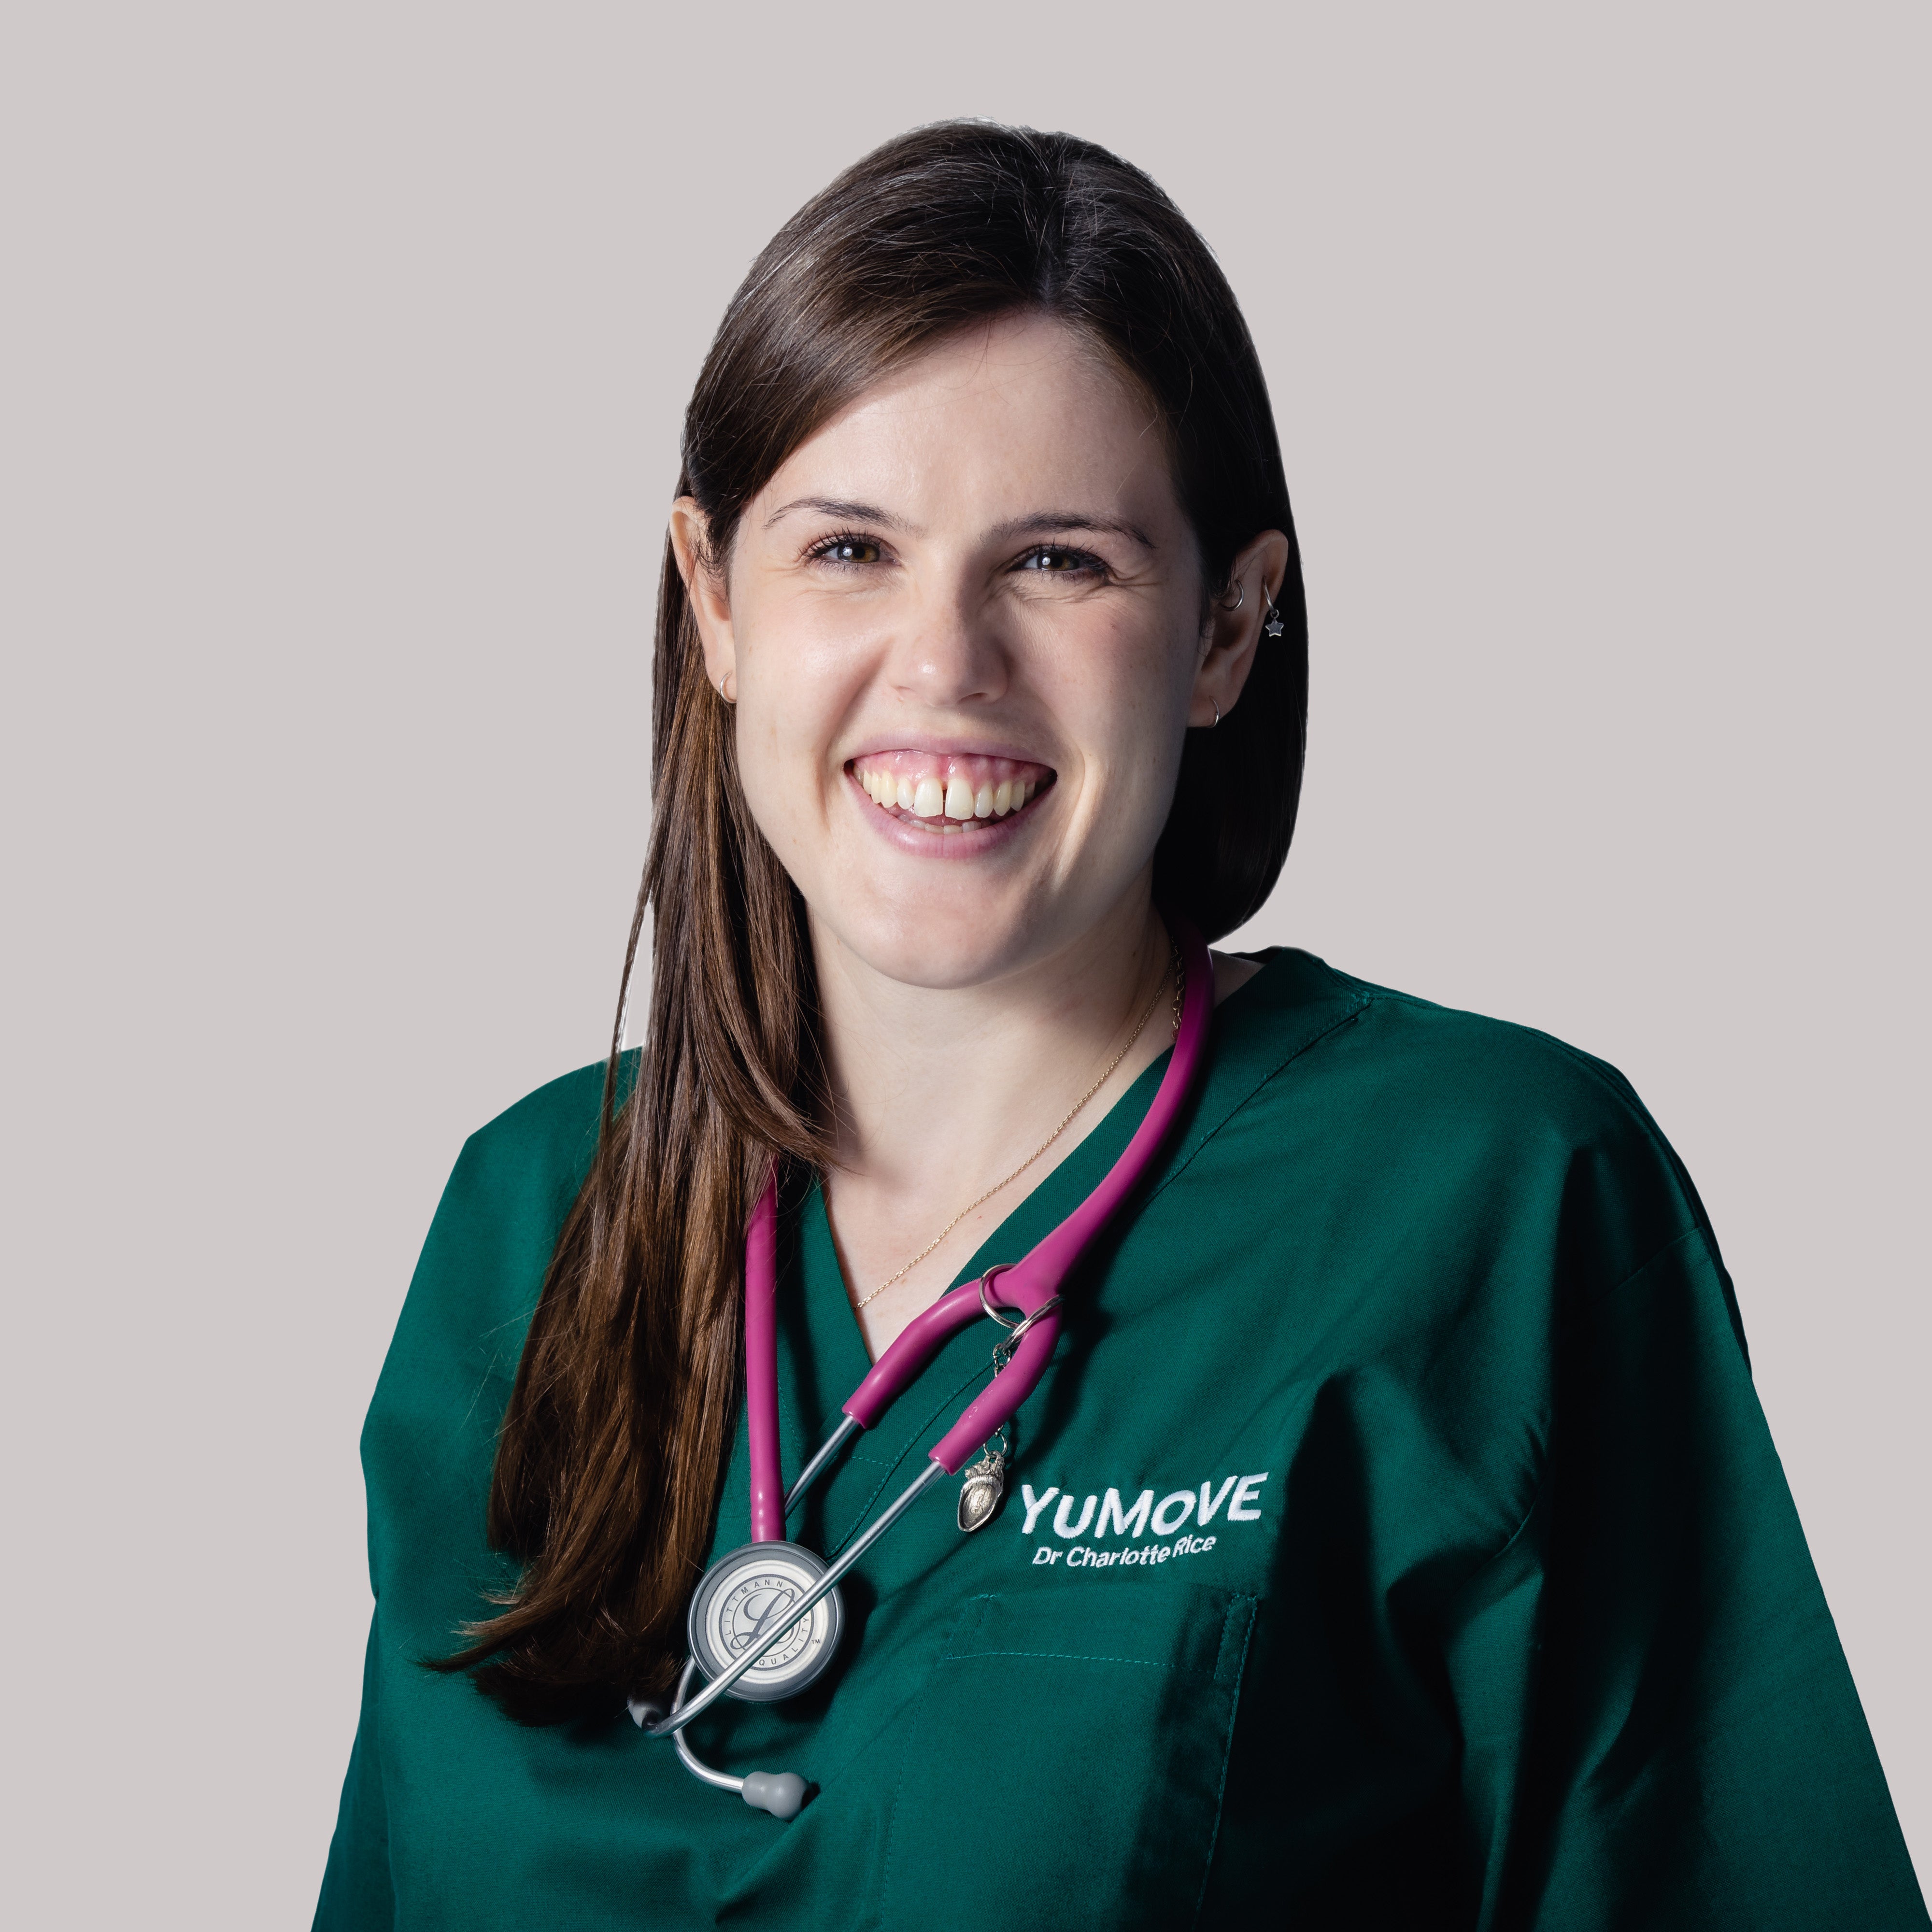 This image is of Dr. Charlotte Rice, Veterinary Technical Manager at YuMOVE, wearing green YuMOVE branded scrubs and a stethoscope in front of a plain white background.